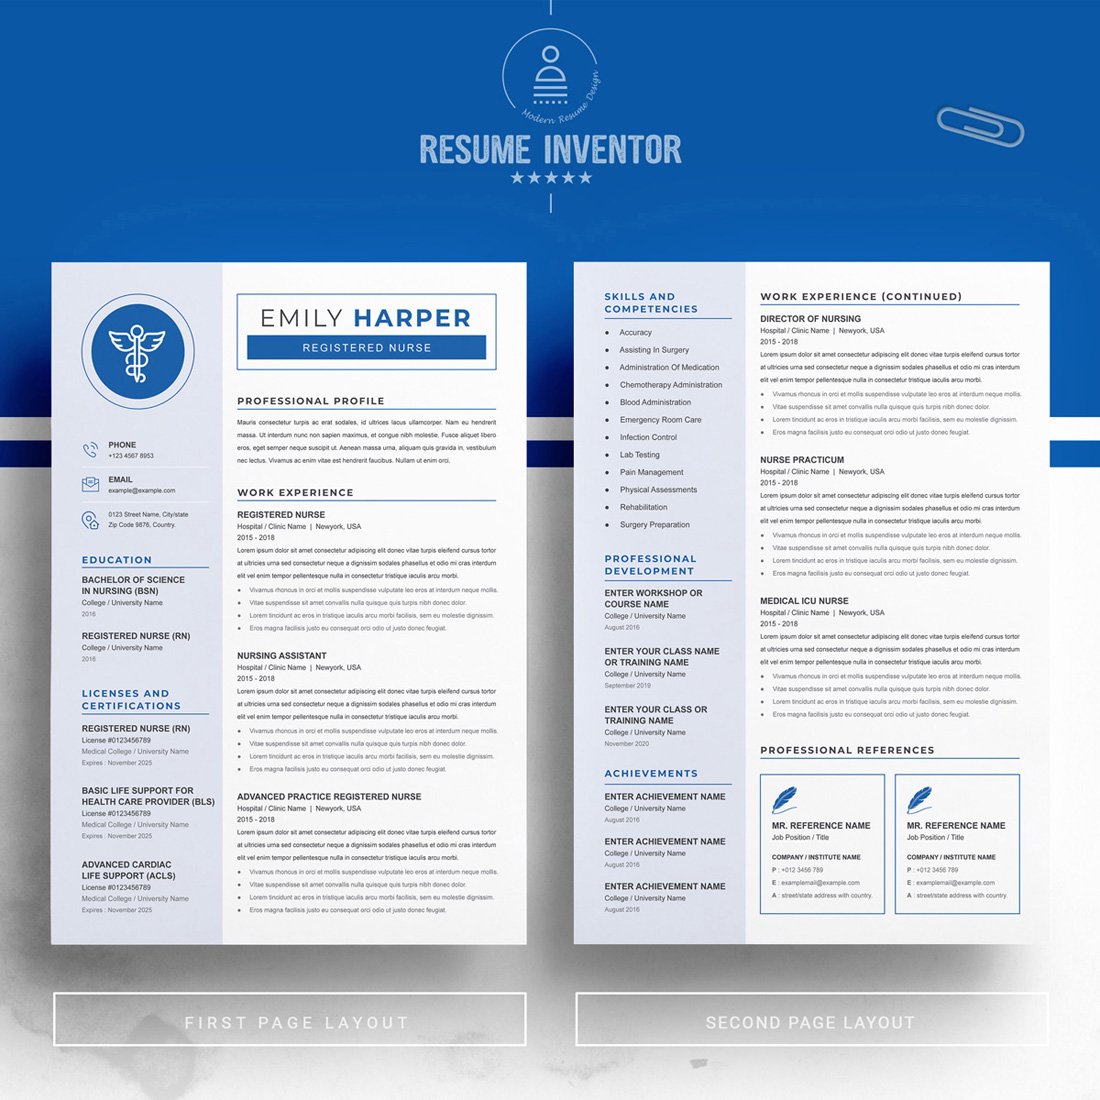 Two pages of resume. New Nurse Resume CV Template.